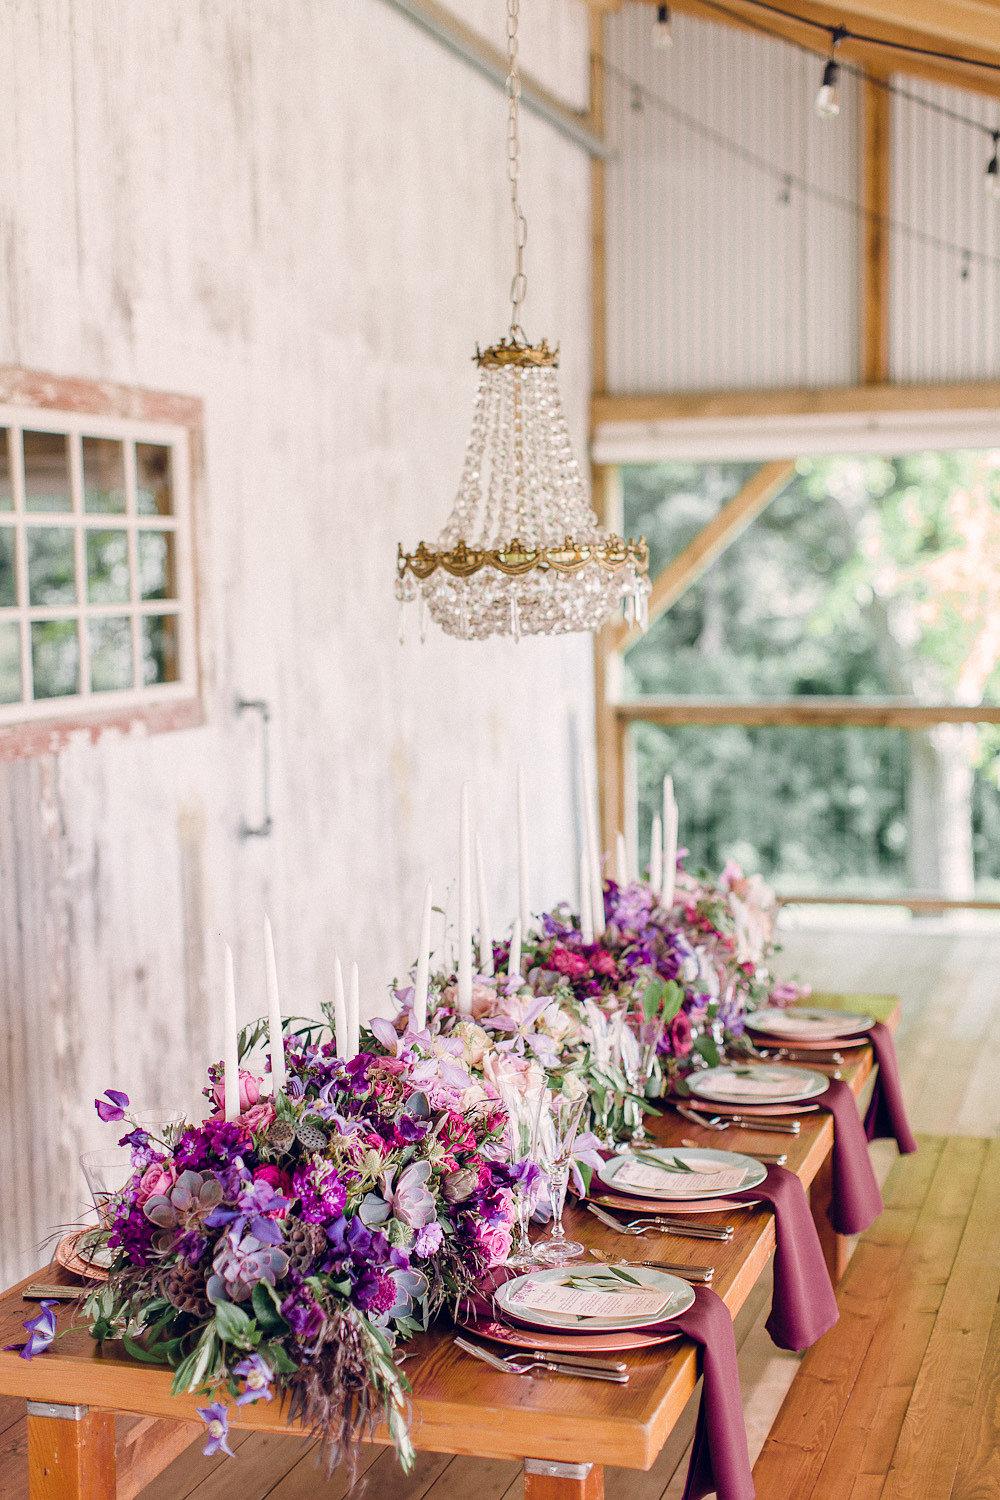 Wedding Table Settings that Make for a Beautiful Reception